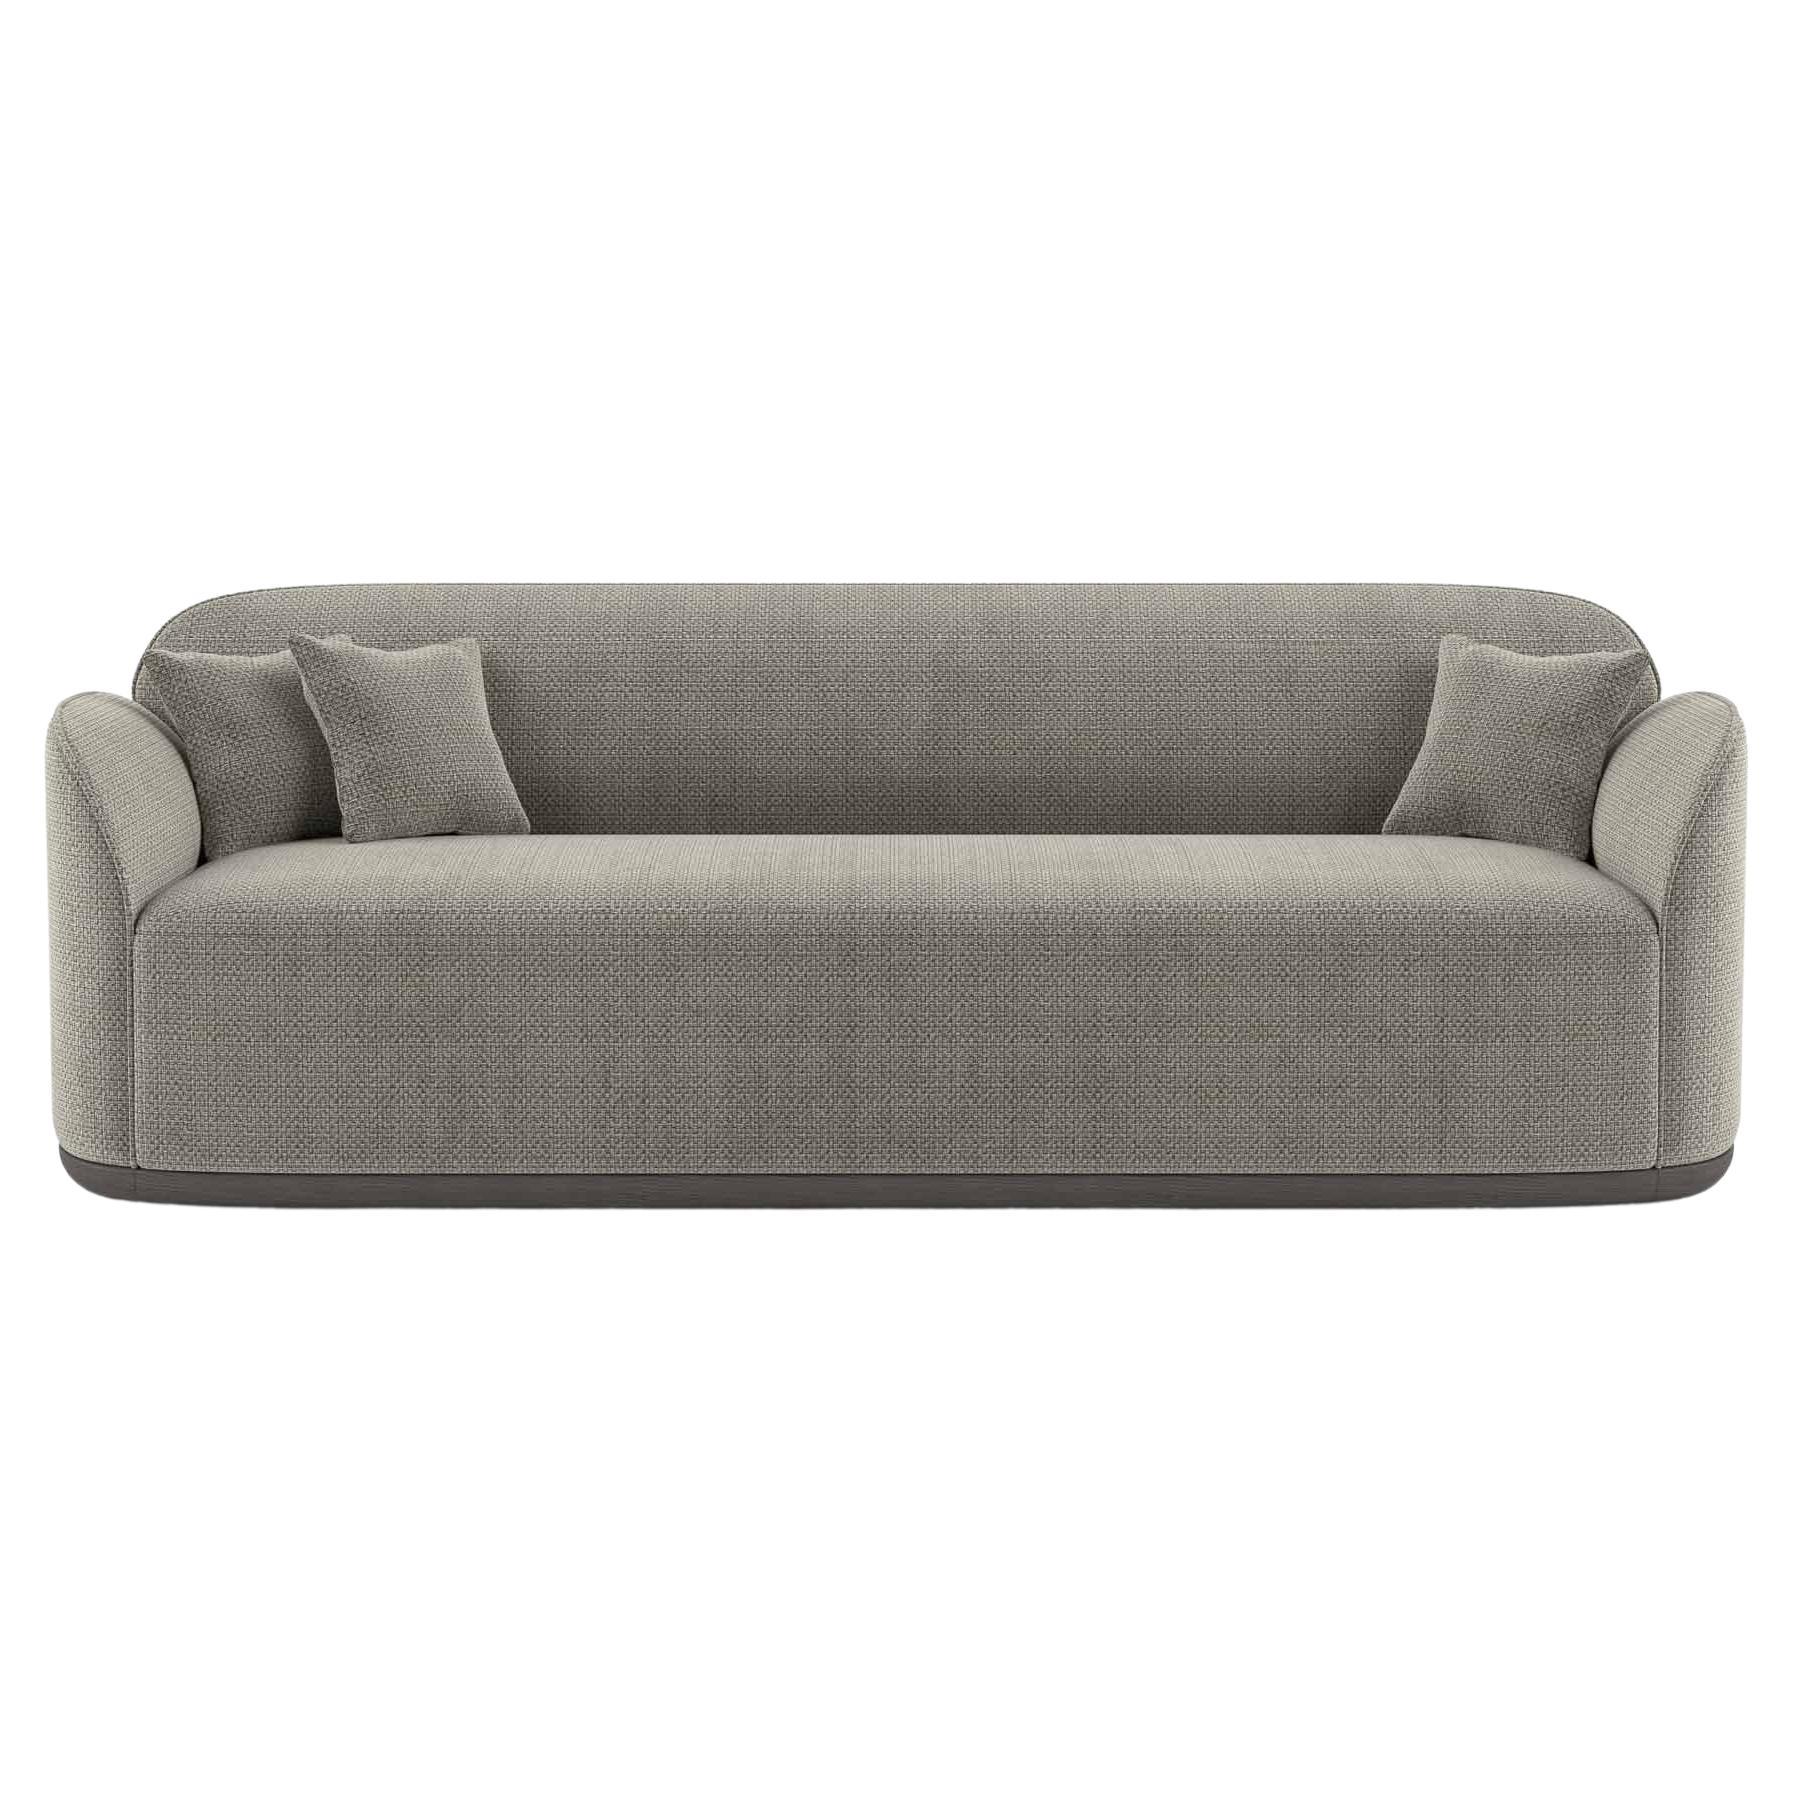 Contemporary Sofa 'Unio' by Poiat, 3 seaters, Fabric Hanoi 04 by Pierre Frey